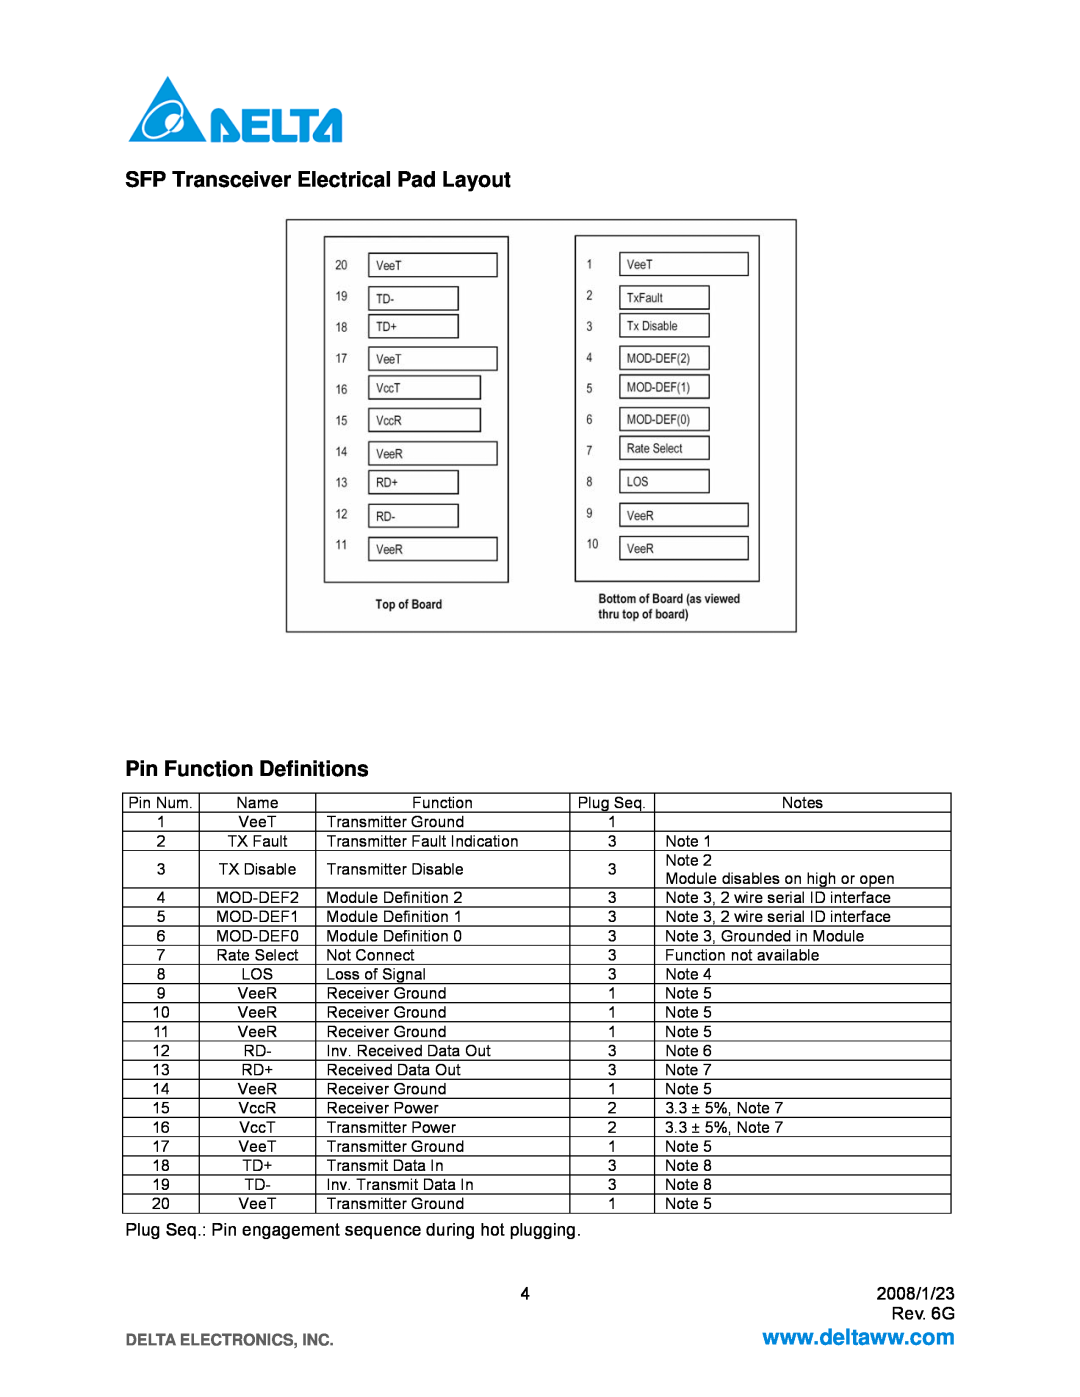 Delta Electronics LCP-1250B4QDRx SFP Transceiver Electrical Pad Layout Pin Function Definitions, 2008/1/23, Rev. 6G 